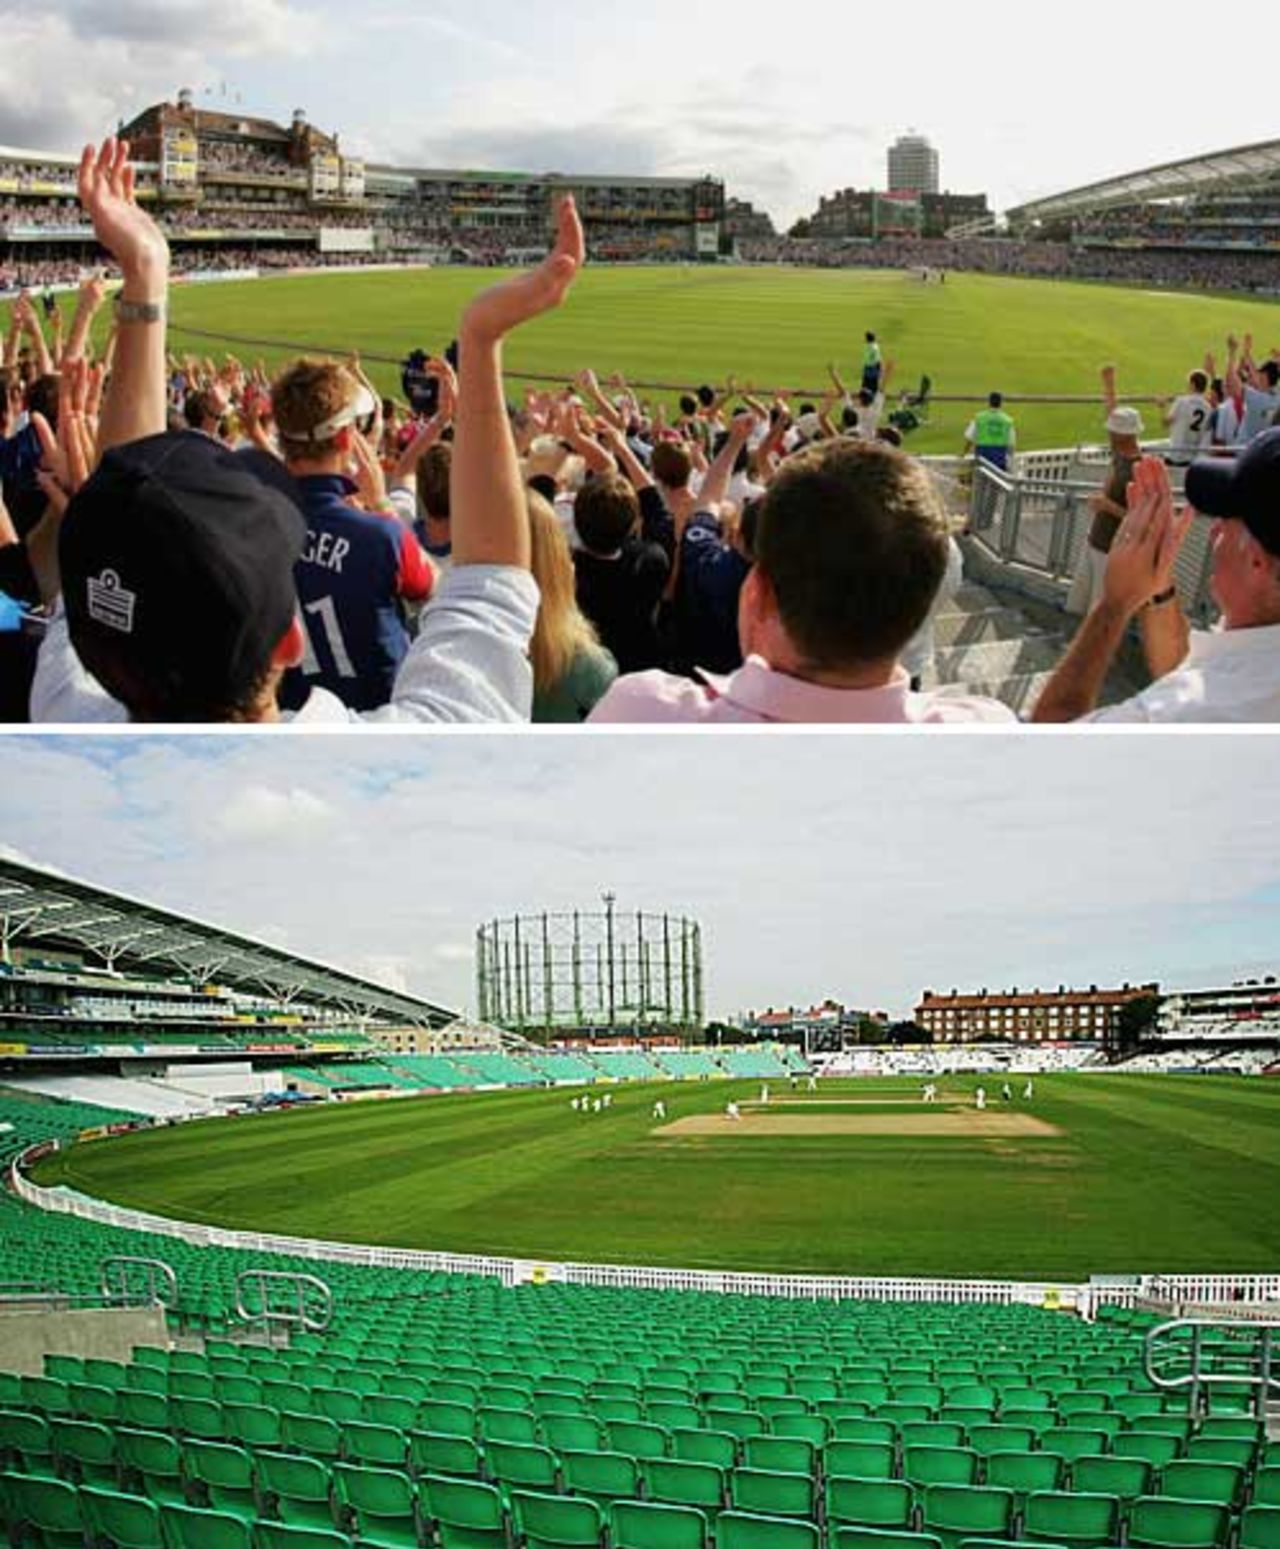 Contrasting scenes: The Oval a little over a week ago, as England drew with Australia to regain the Ashes, September 12, 2005.  And, nine days later, the scene is starkly different for Surrey's game against Middlesex, September 21, 2005